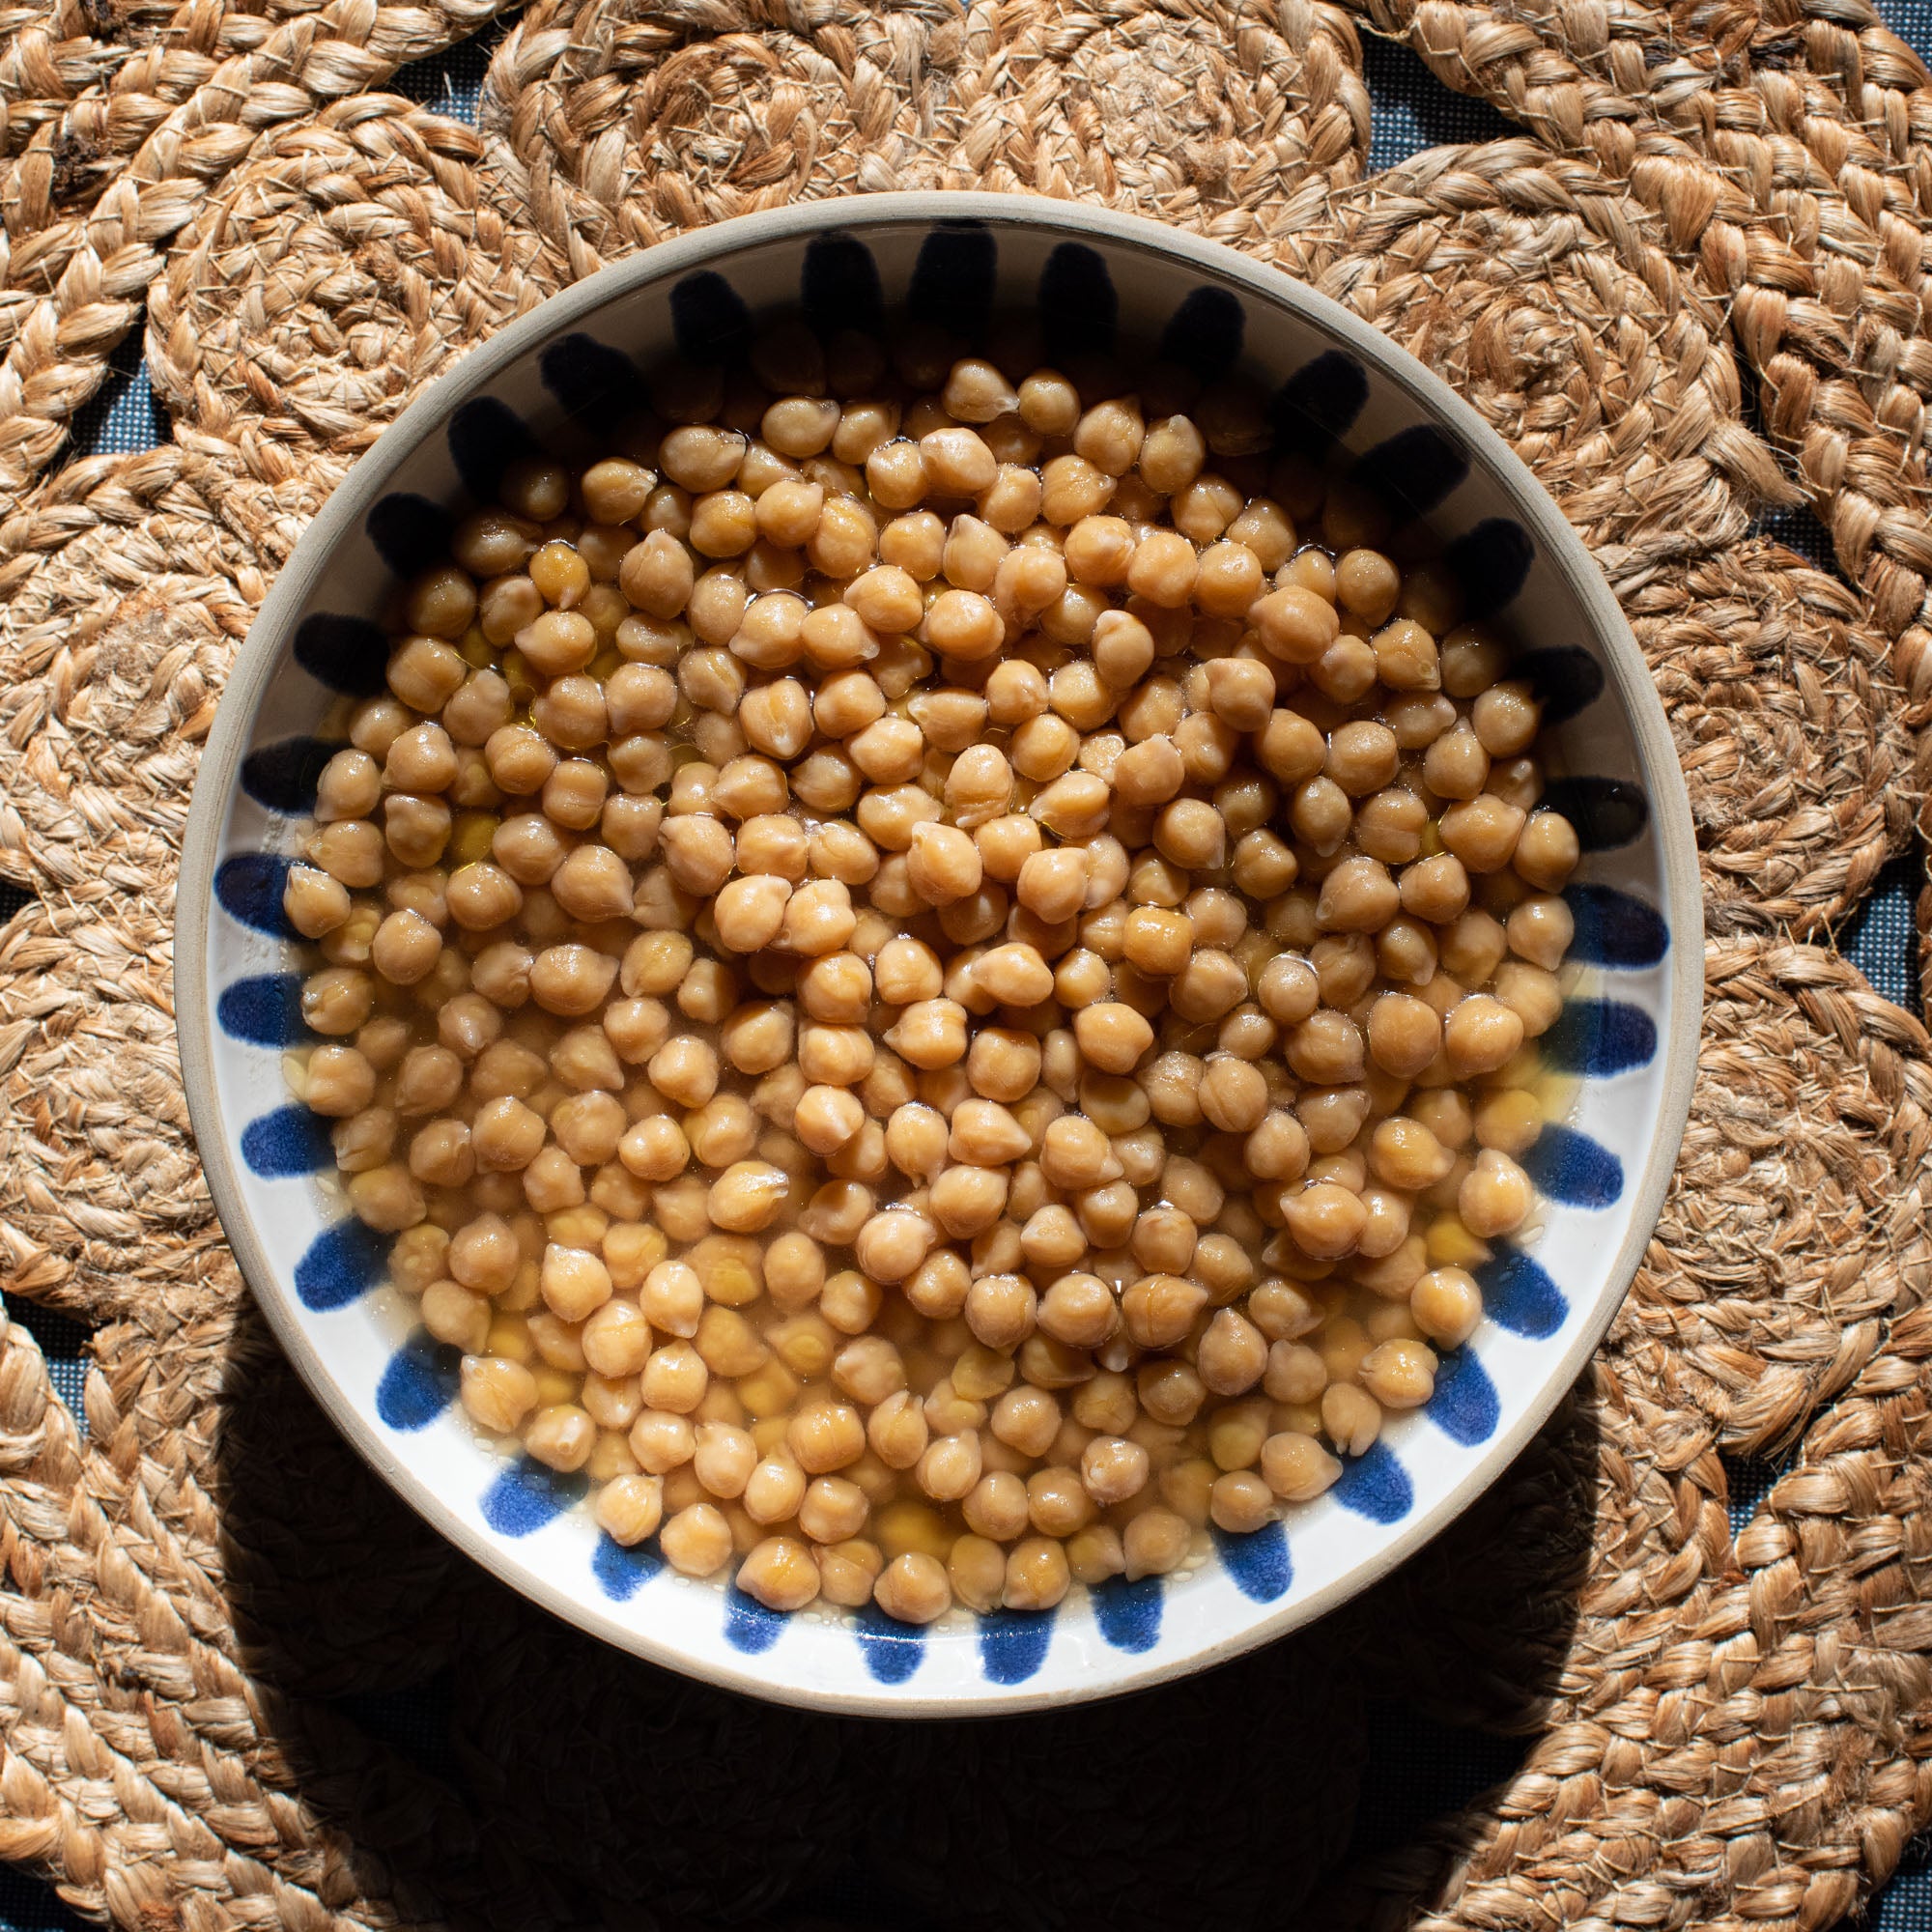 Primary Beans Chickpeas brothy